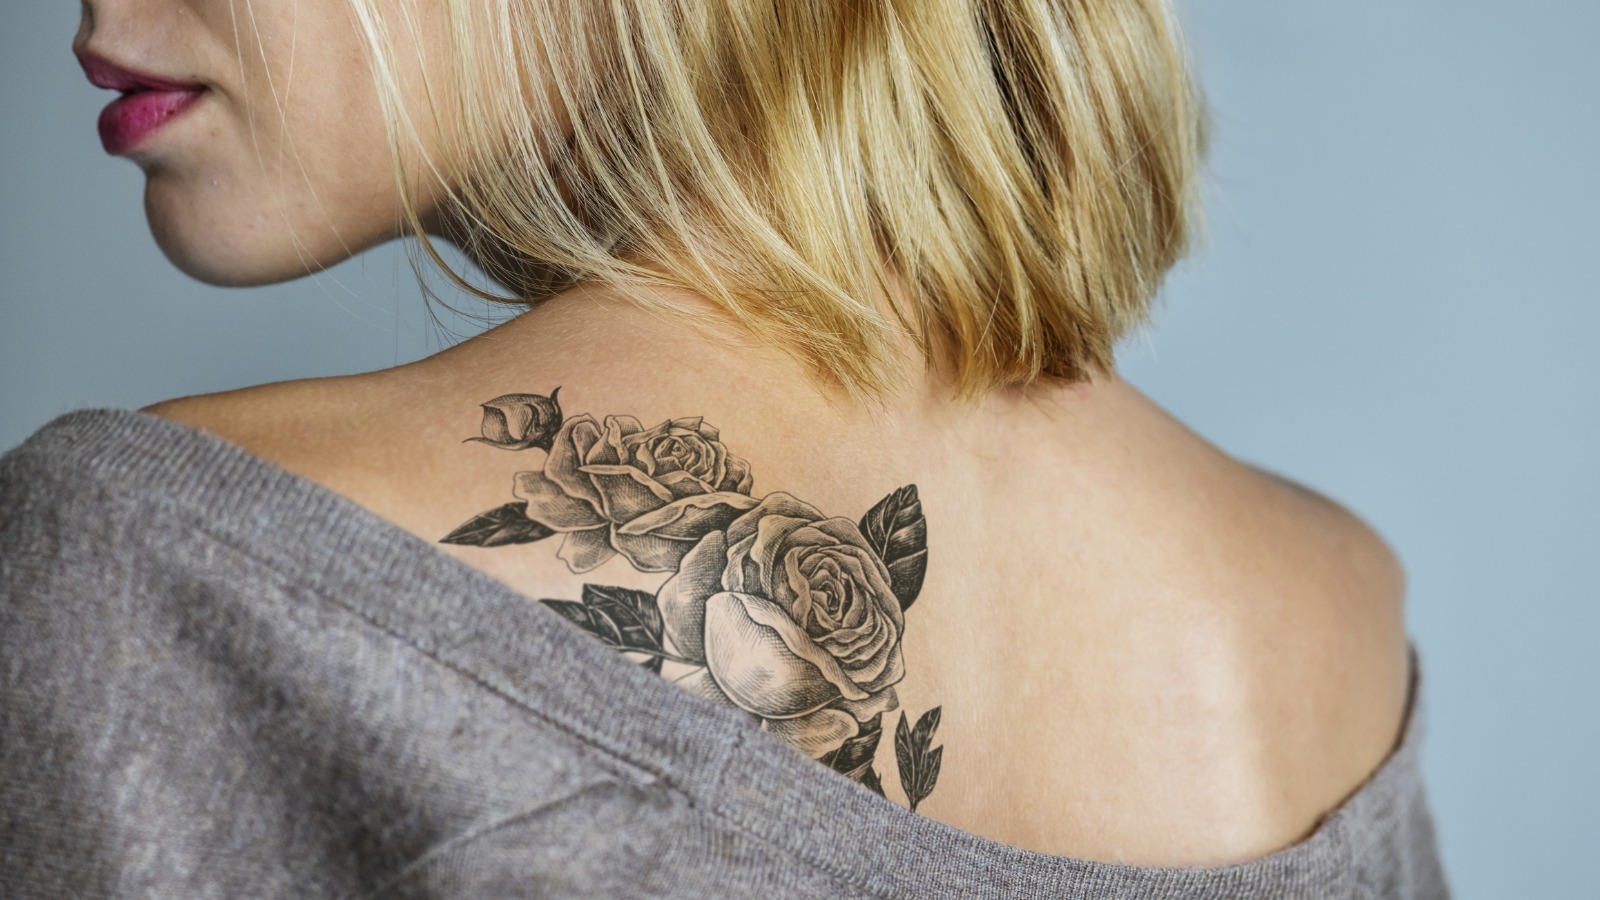 How Much Do Tattoos Actually Hurt? We Asked a Dermatologist